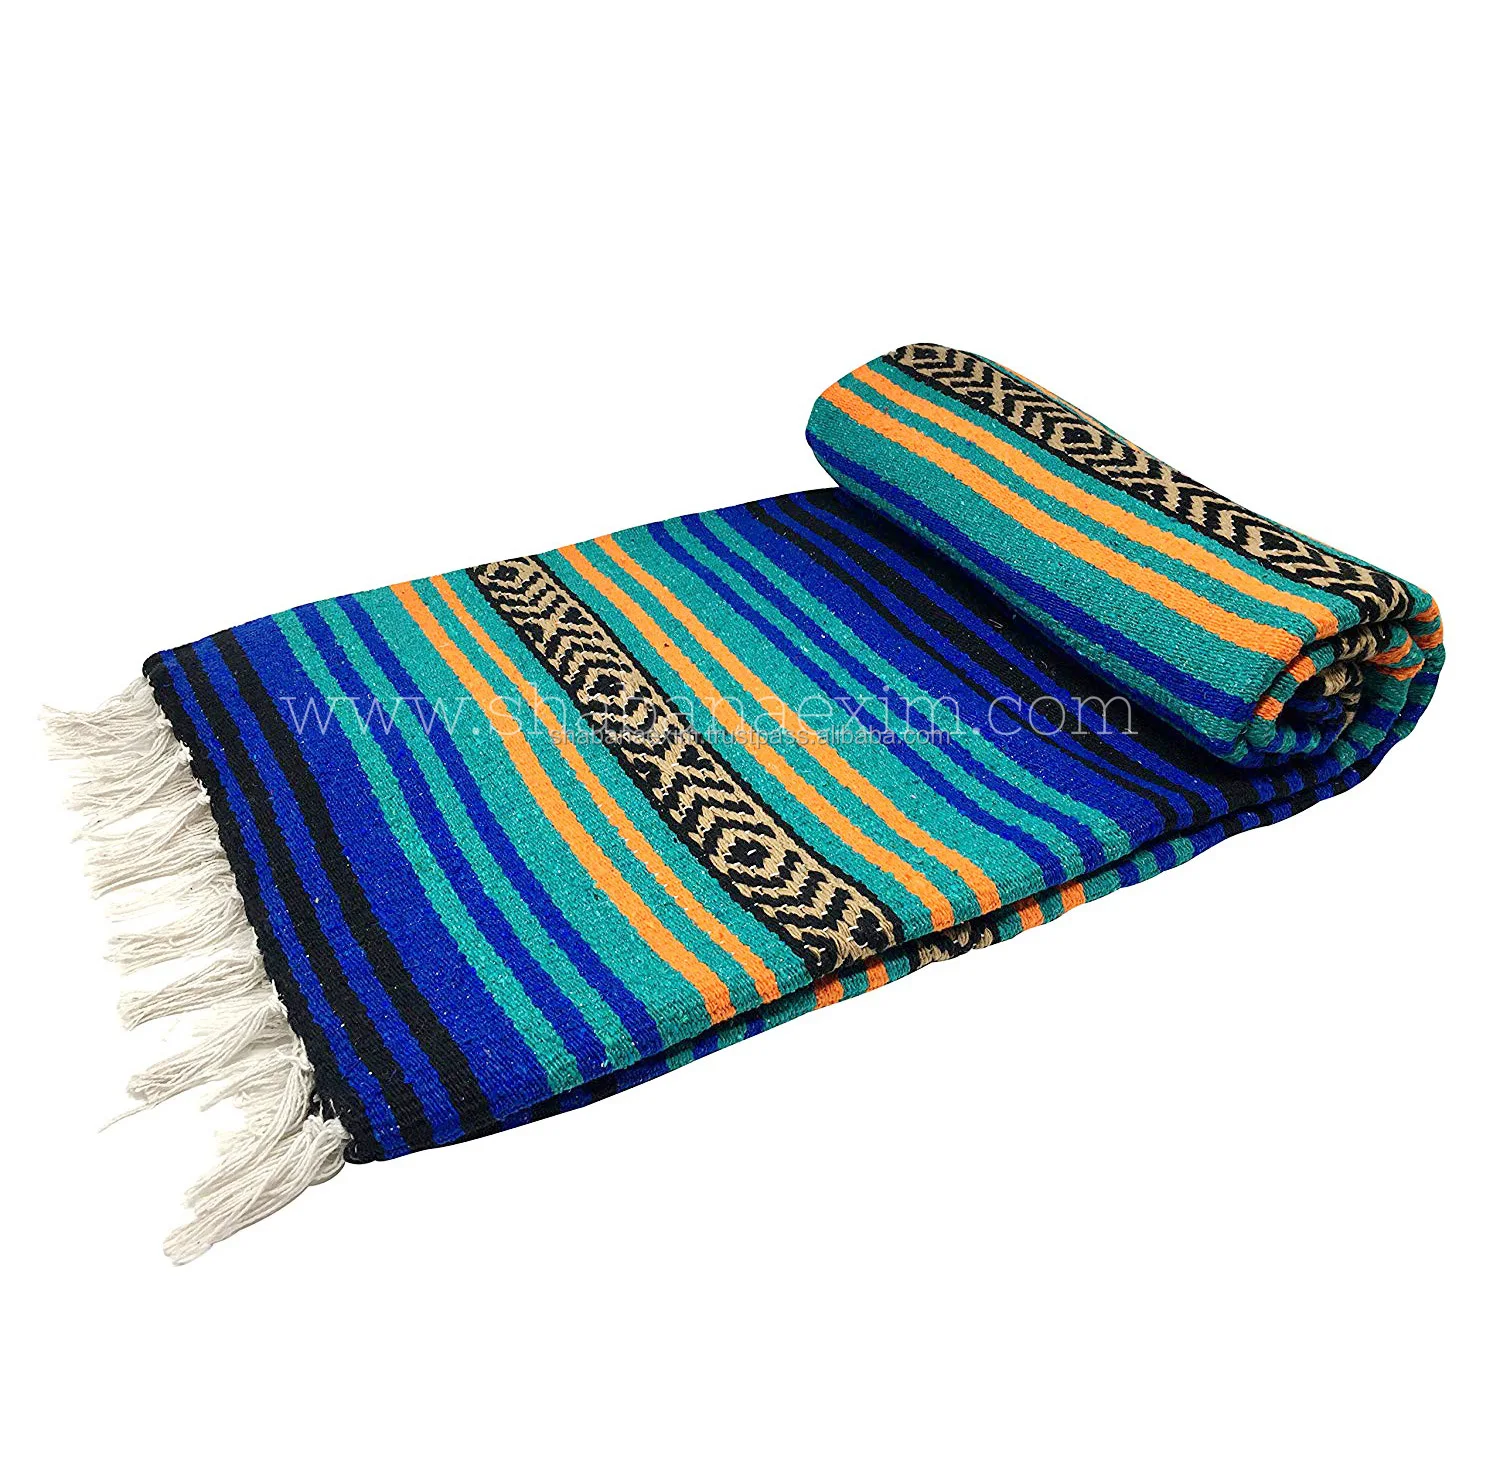 Mixed Pattern Woven Falsa Blanket Colorful Mexican Throw Blanket Buy Heavy Throw Blanket